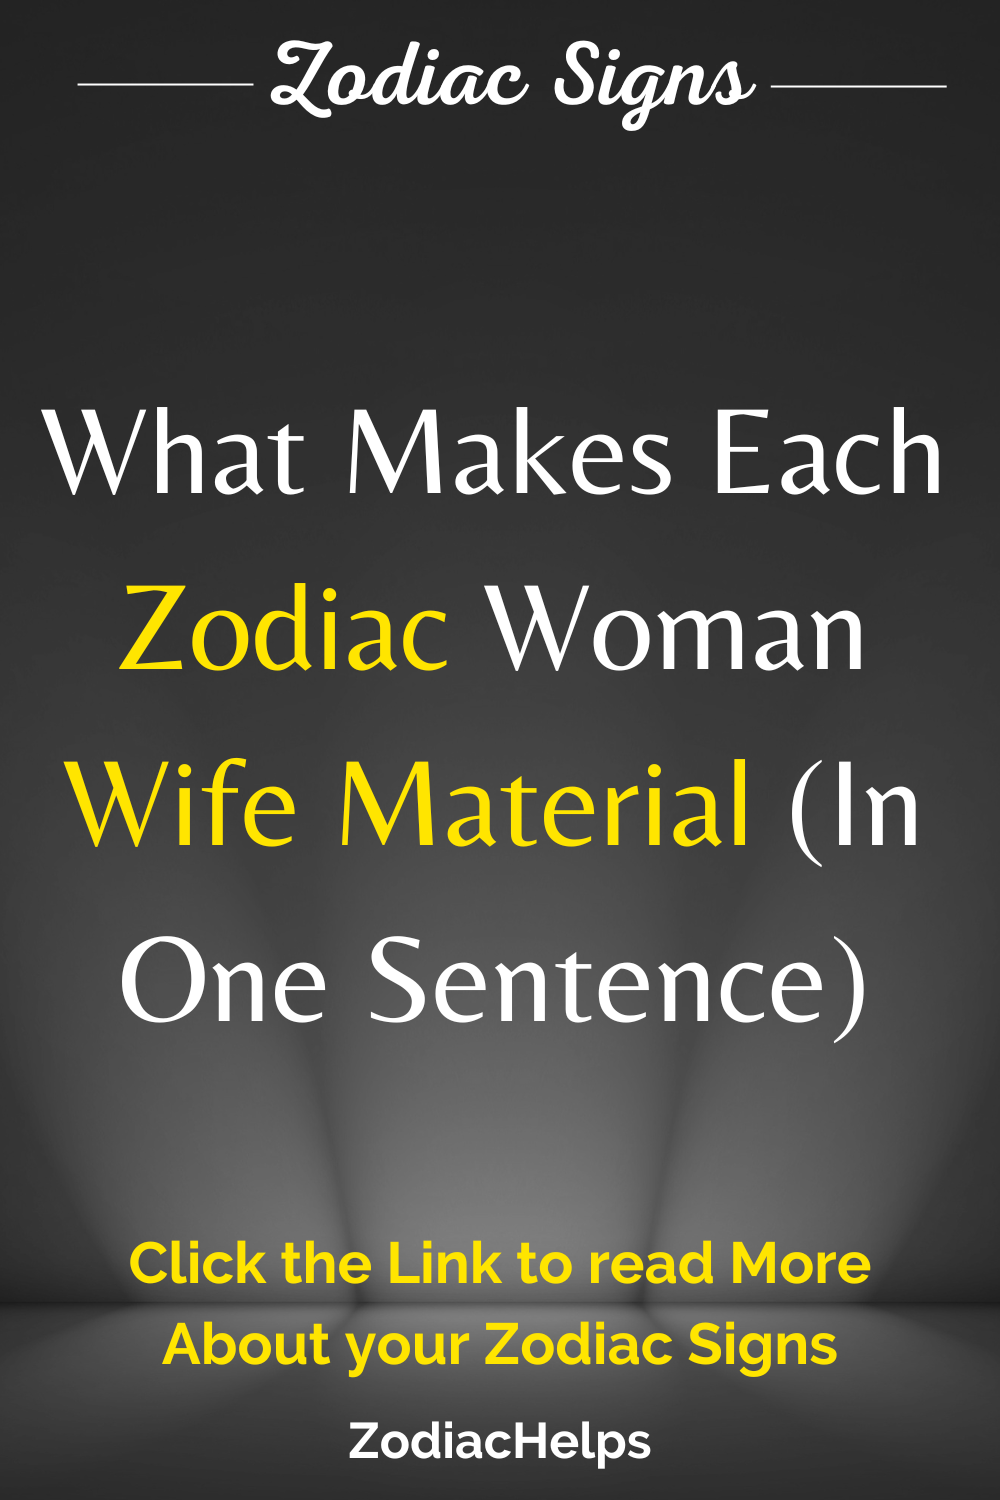 What Makes Each Zodiac Woman Wife Material (In One Sentence)